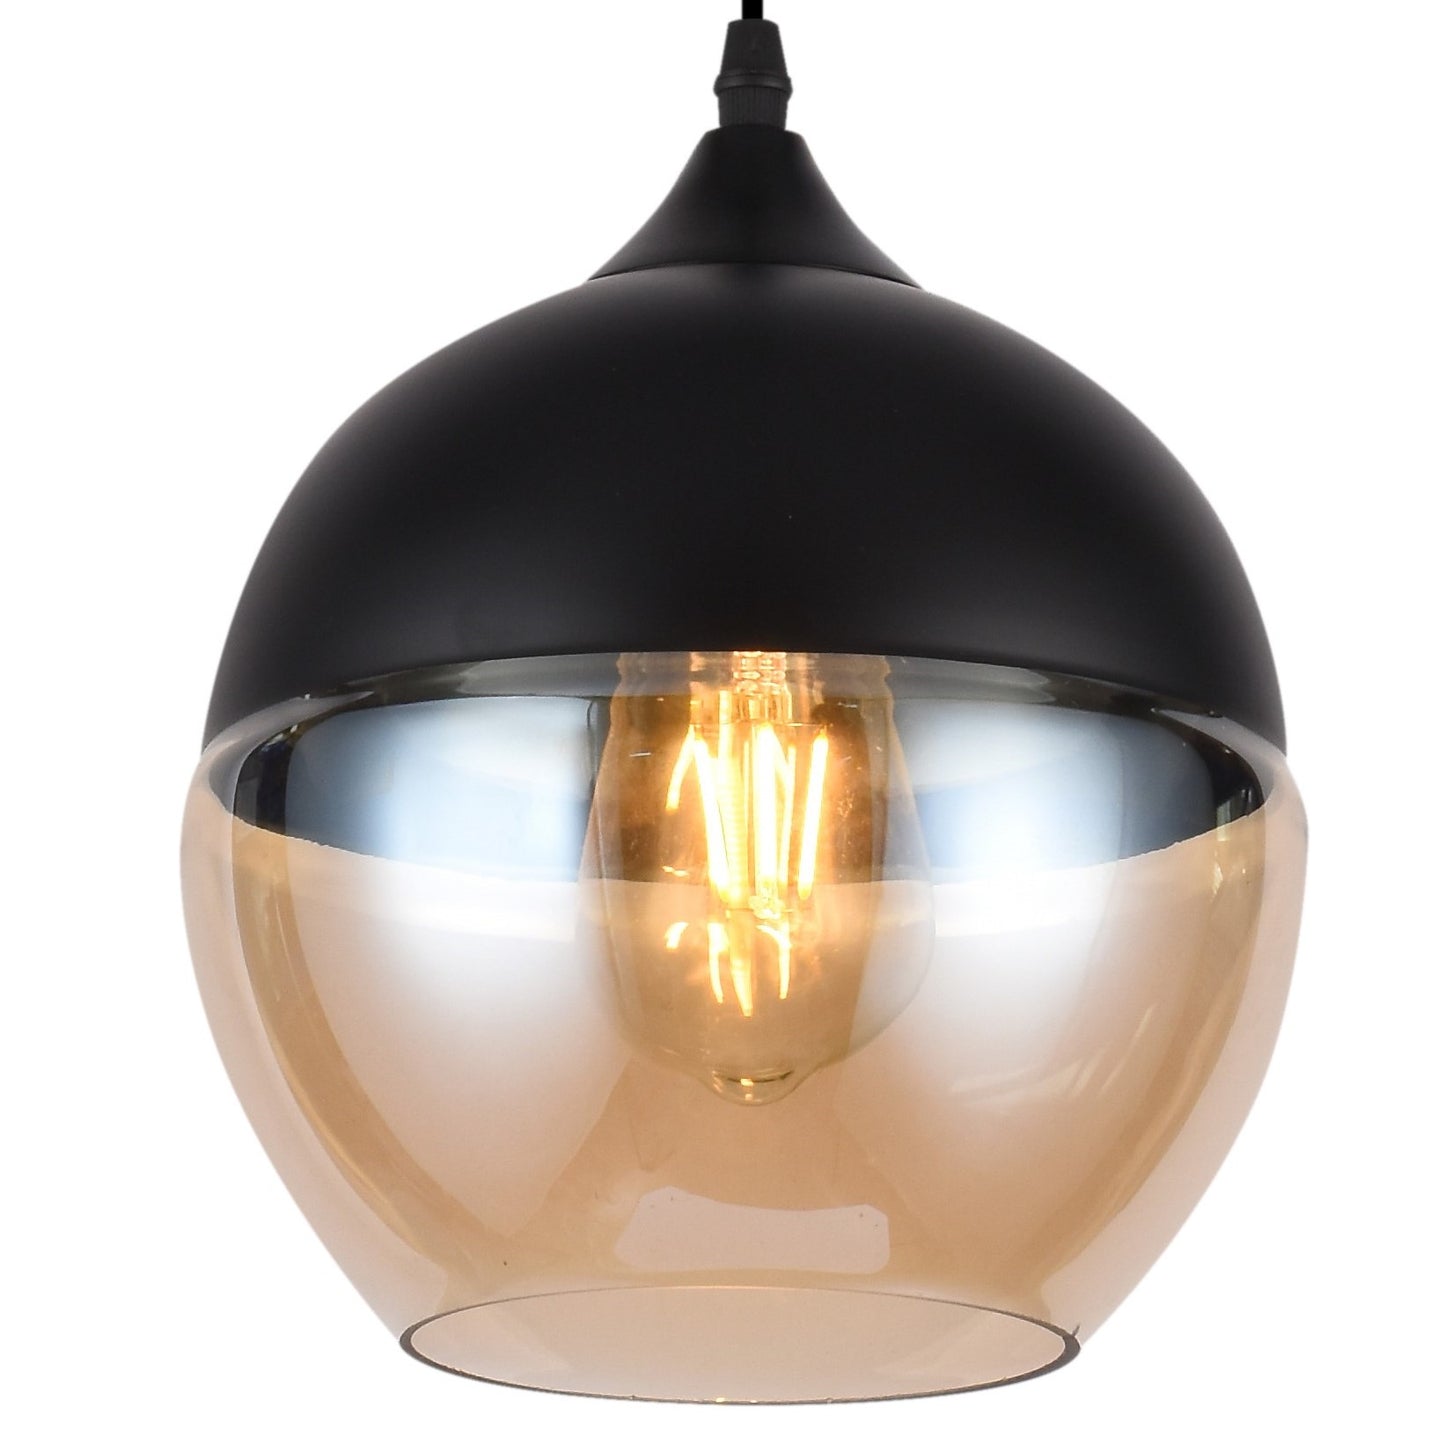 CGC LENDER Black with Gold Smoked Glass Round Globe Pendant Ceiling Light